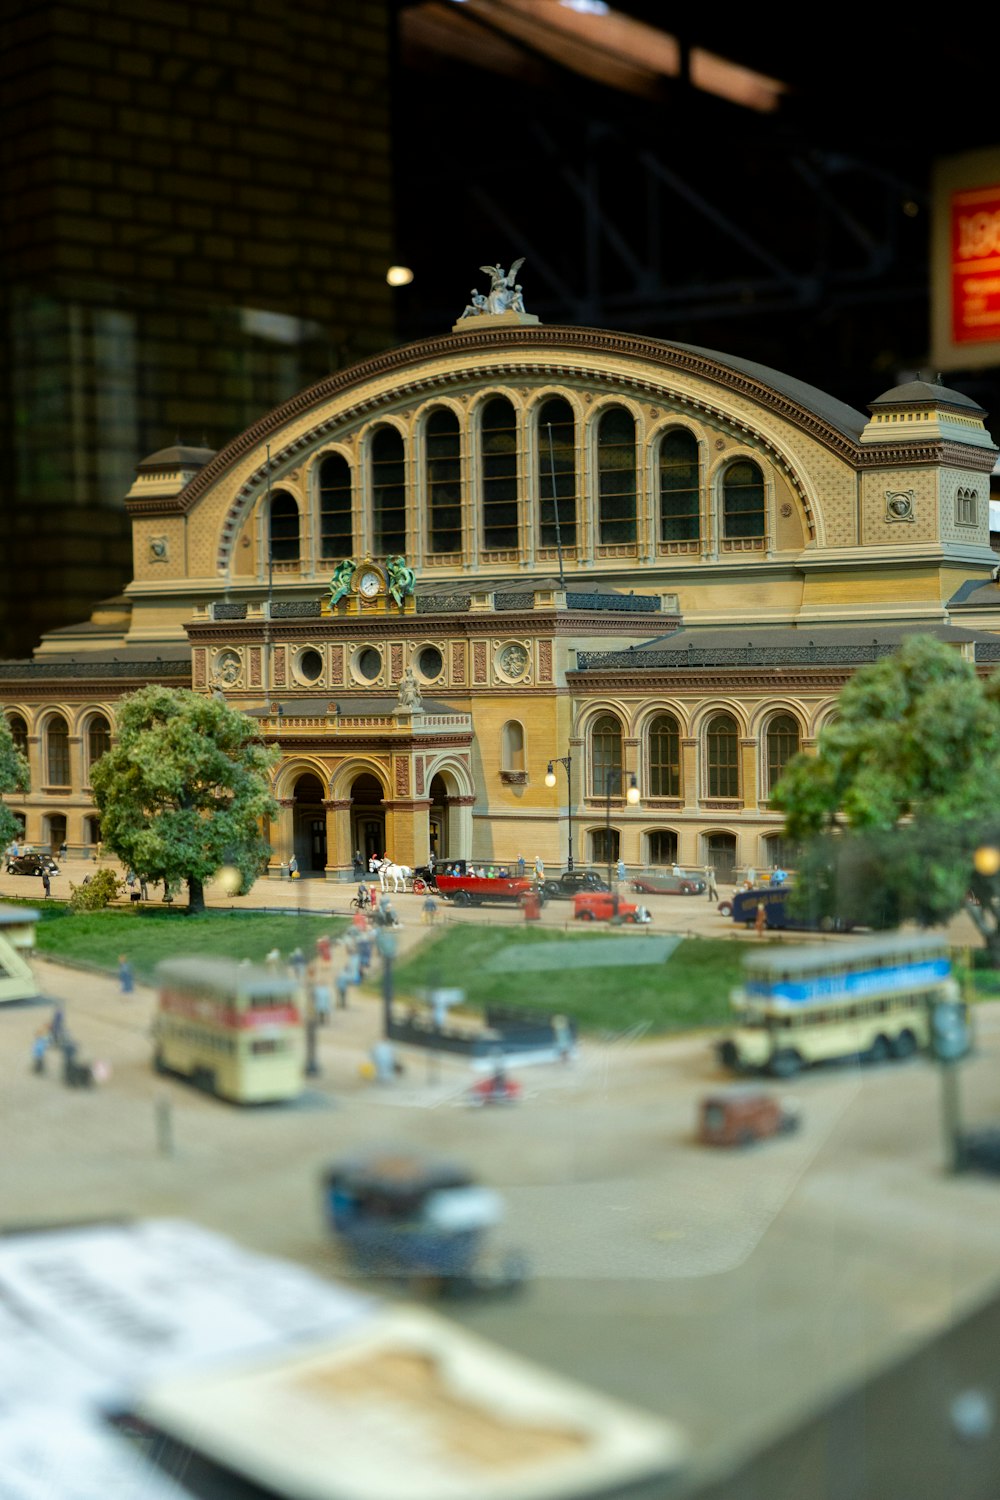 a model of a train station is shown